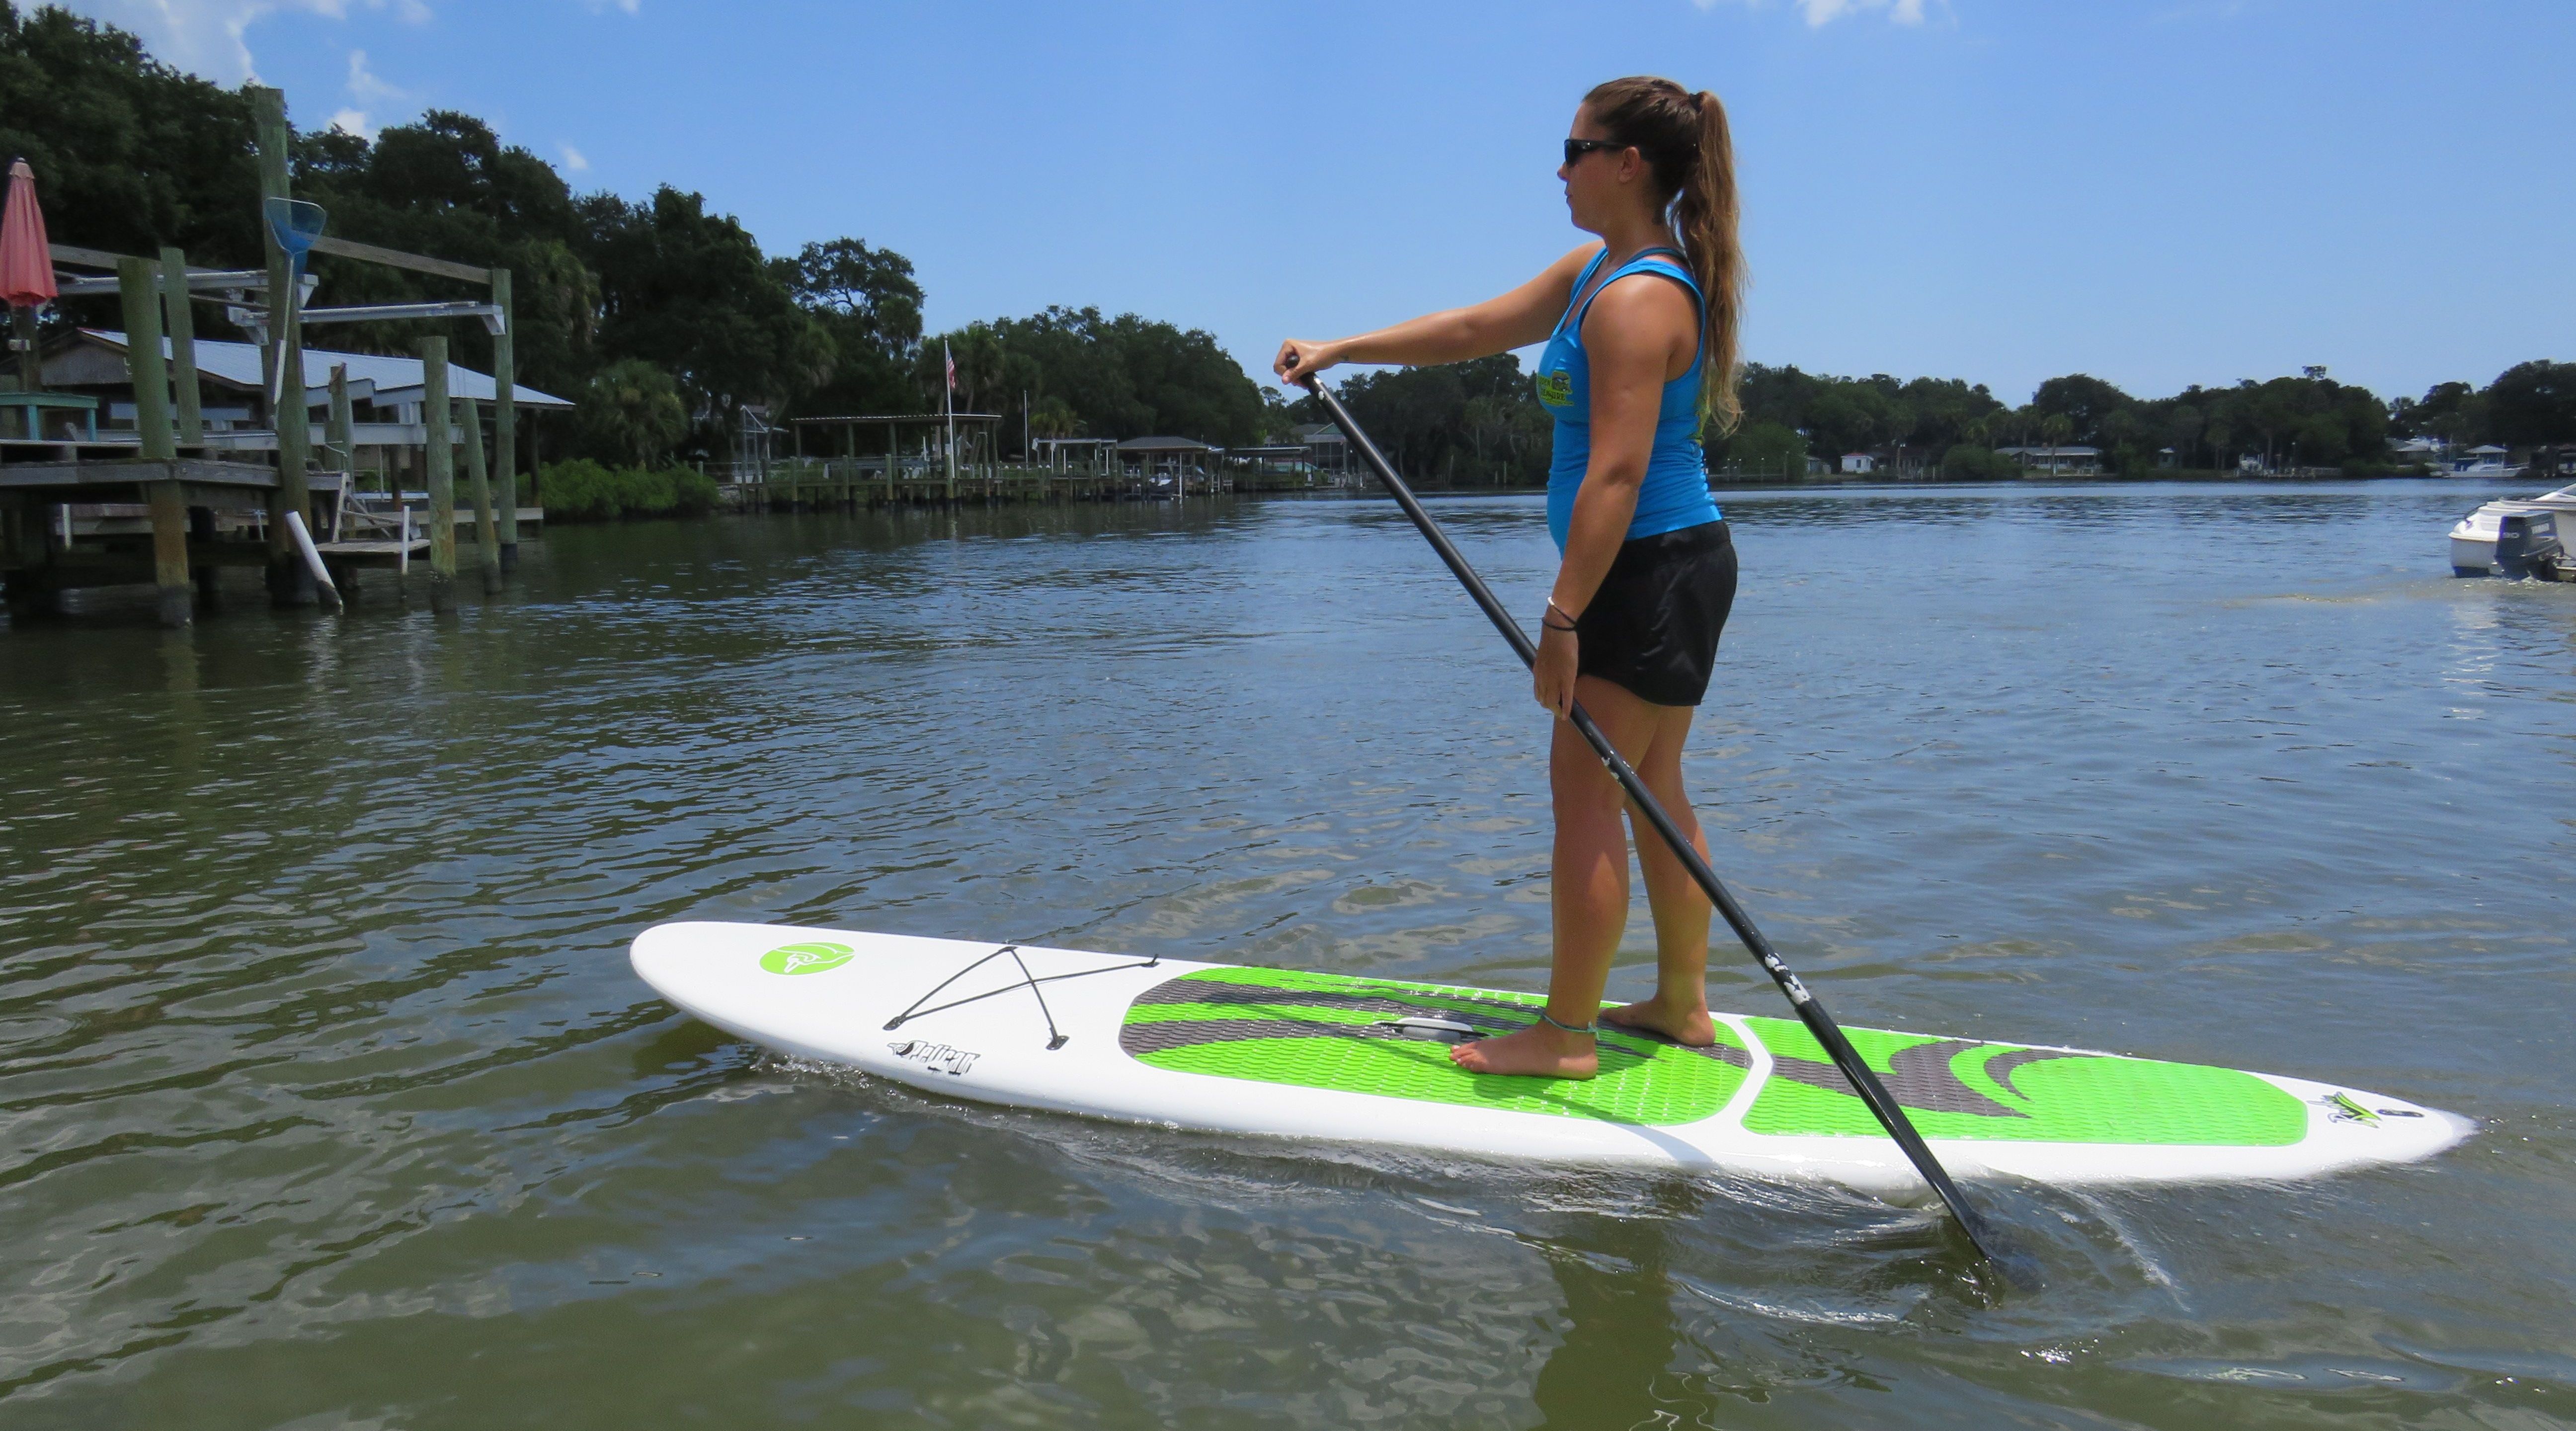 1-Hour Stand-Up Paddle Board Rental: Book Tours & Activities at Peek.com